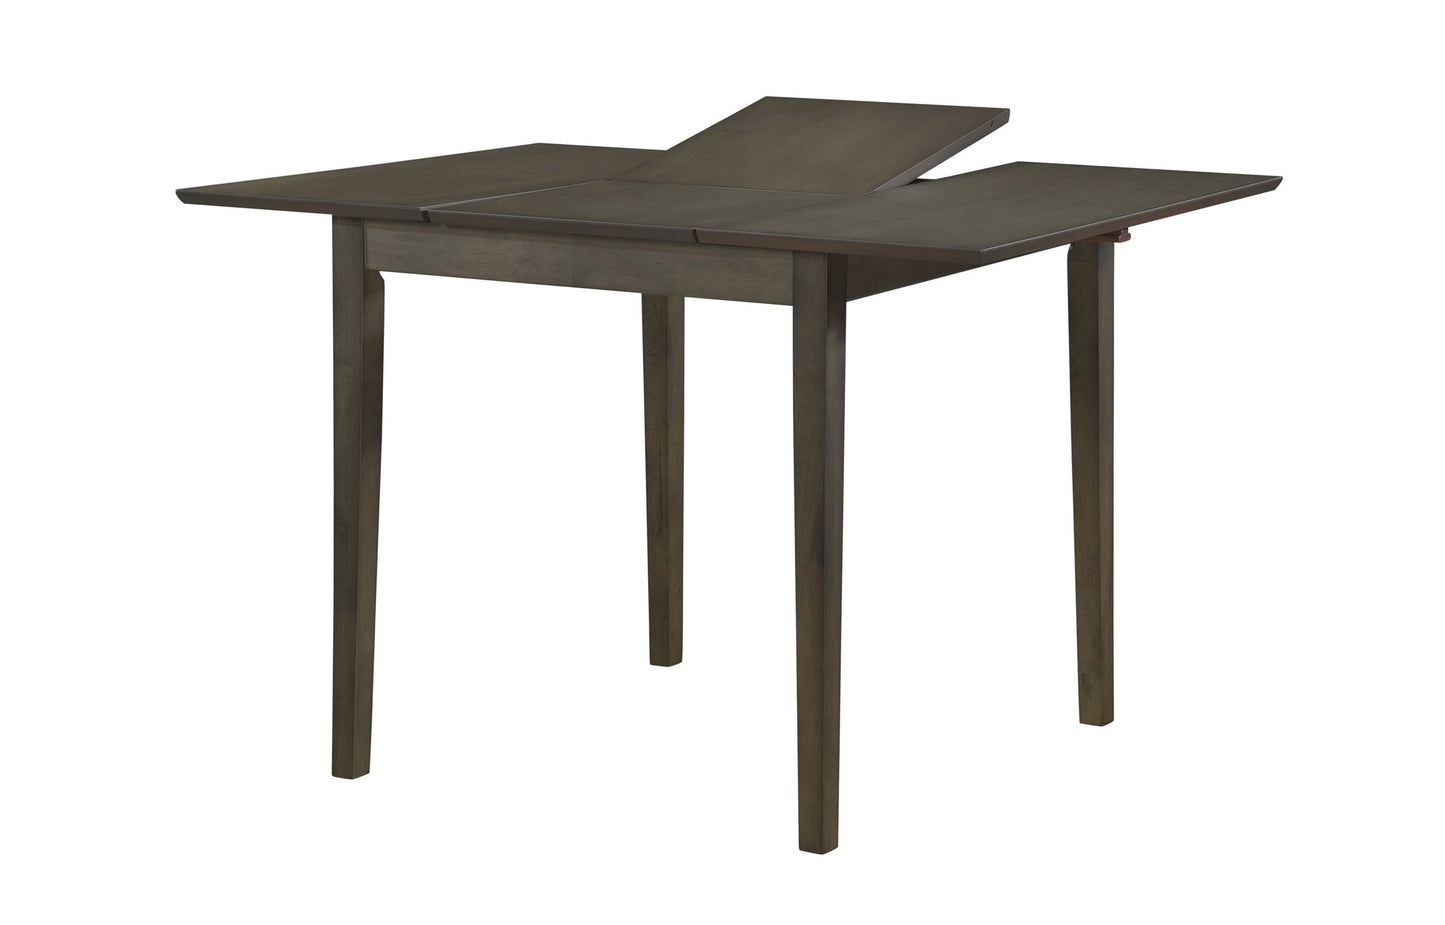 Walsh 32 x 47 Rect Table